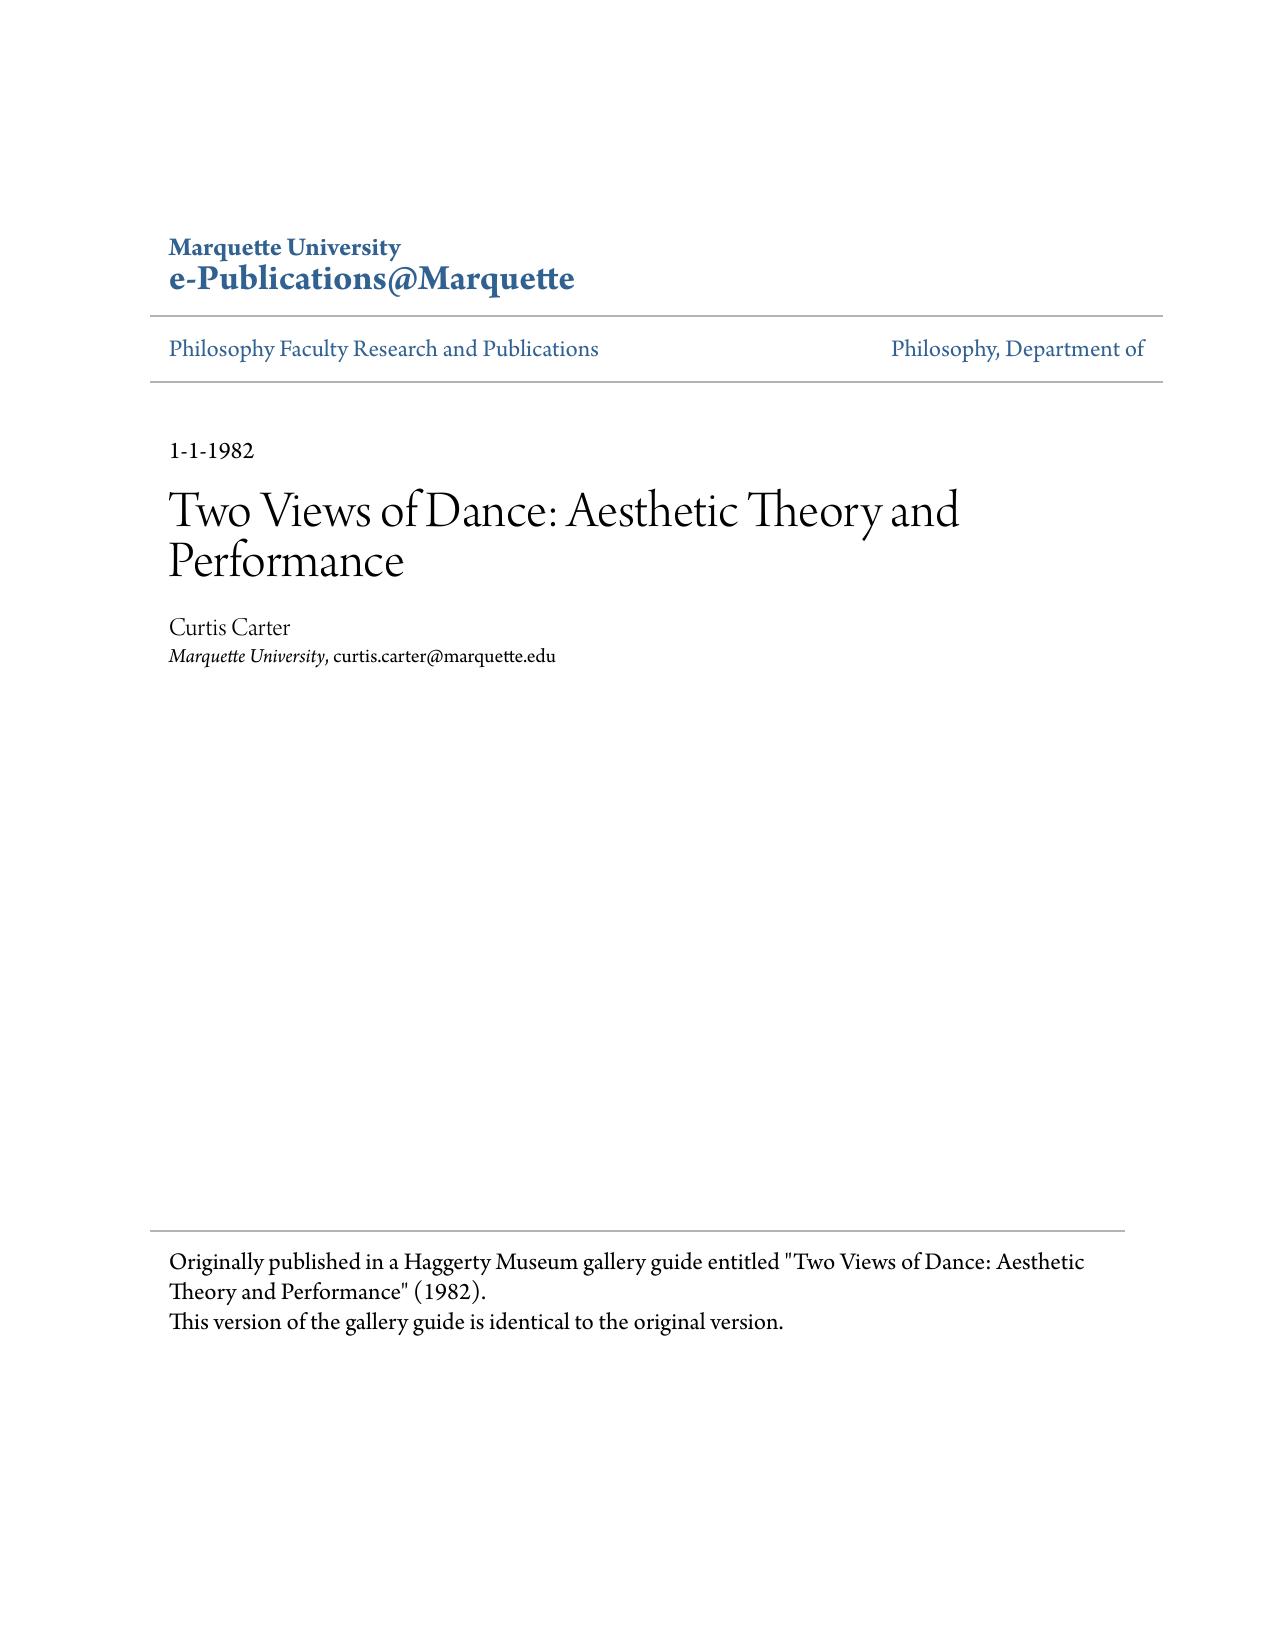 Two Views of Dance: Aesthetic Theory and Performance